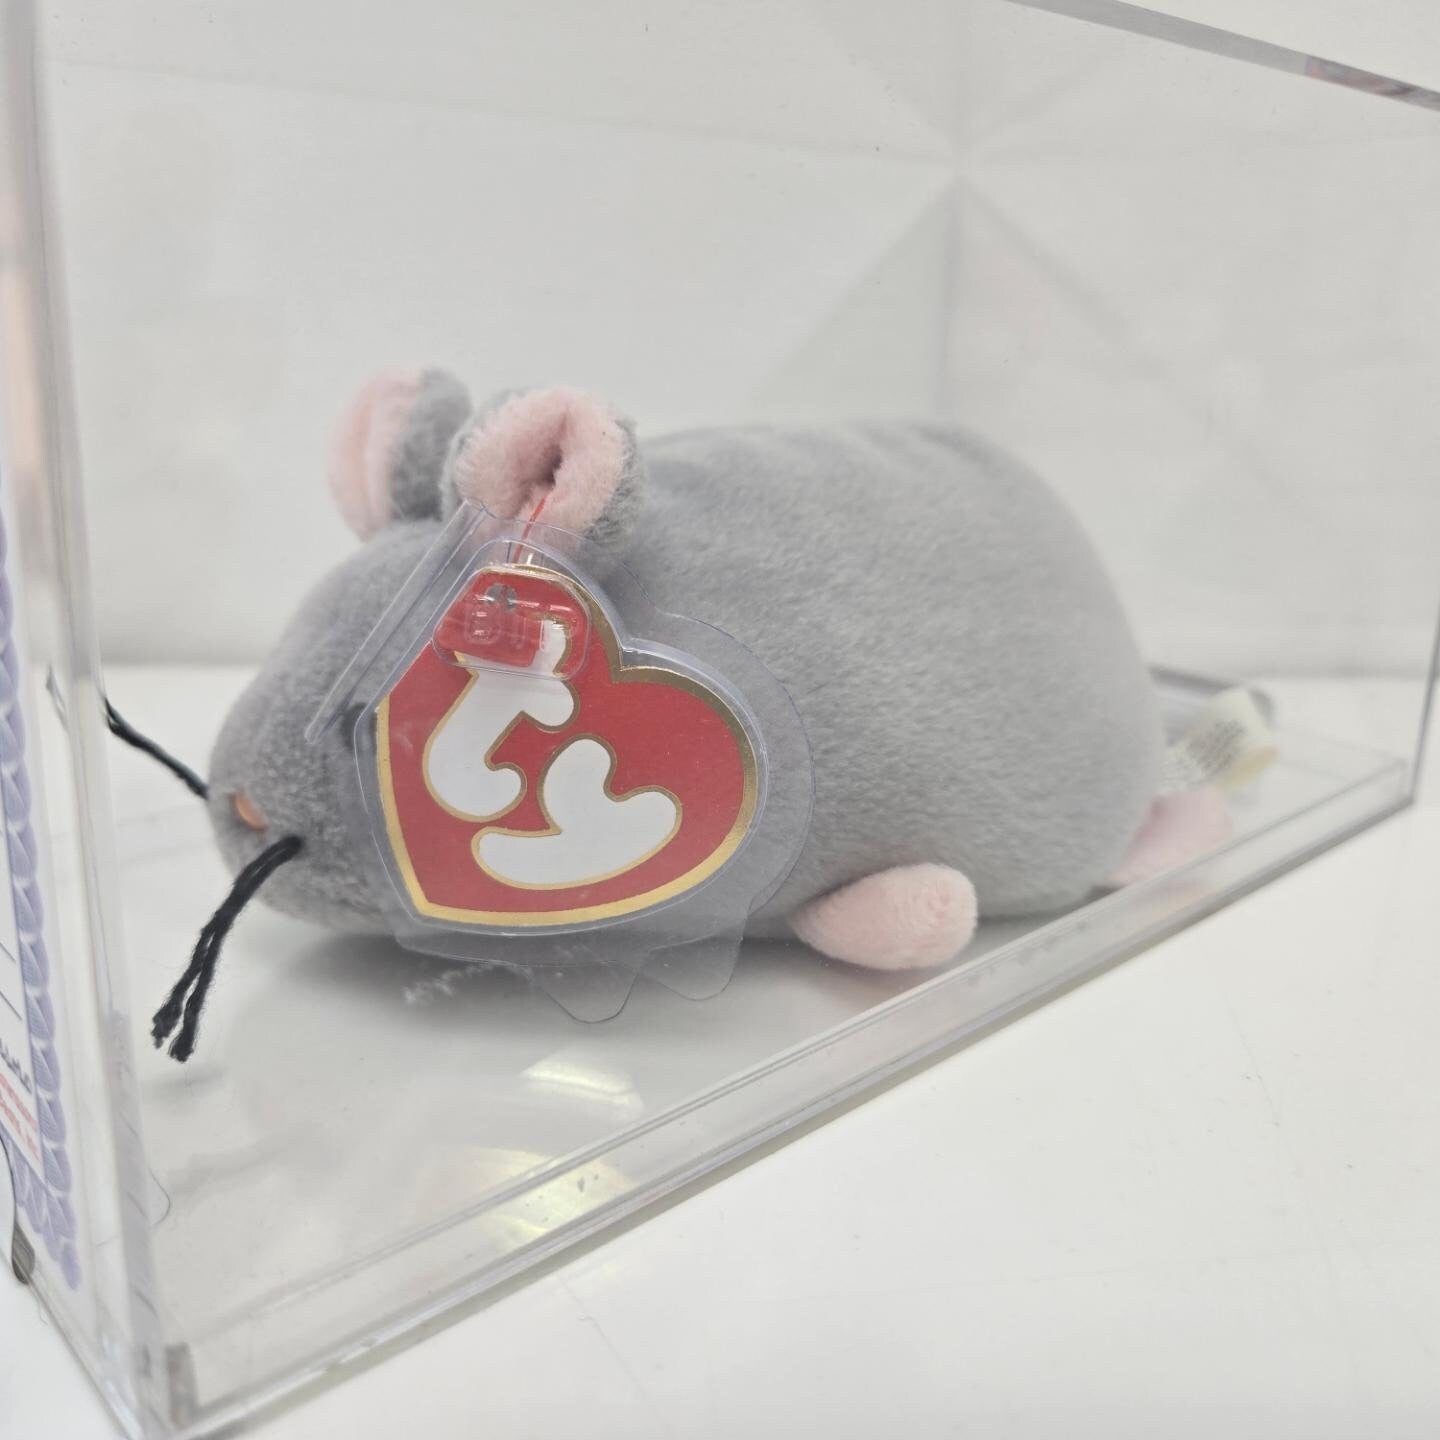 Ty Beanie Baby 3rd Generation “Trap” the Mouse - Authenticated Mint With Mint Tags Museum Quality *Rare* (8.5 inch)